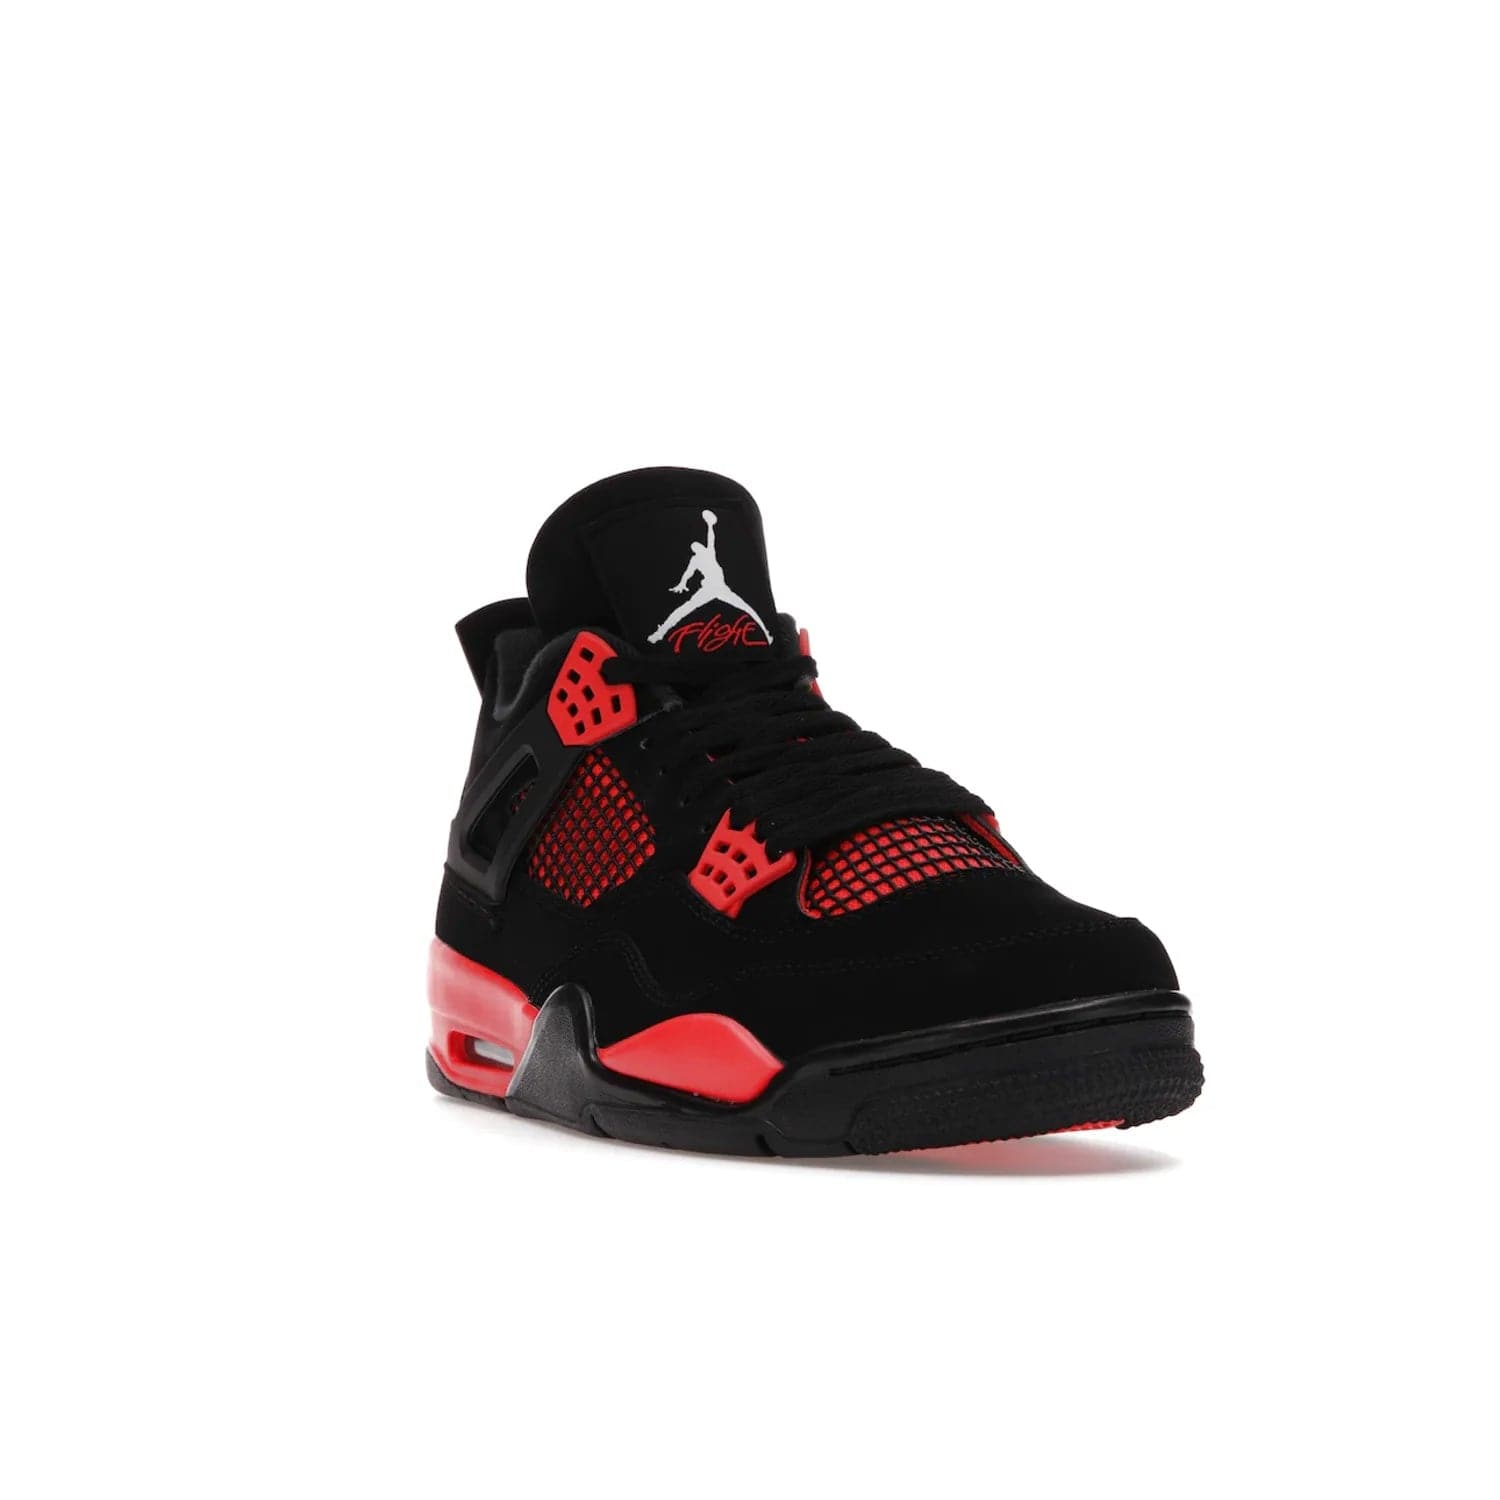 Jordan 4 Retro Red Thunder - Image 7 - Only at www.BallersClubKickz.com - Upscale your footwear with the Air Jordan 4 Retro Red Thunder. Featuring a Durabuck upper, red underlays, signature Flight patch, and vibrant red midsole, this retro sneaker adds style and edge. Releases in January 2022.